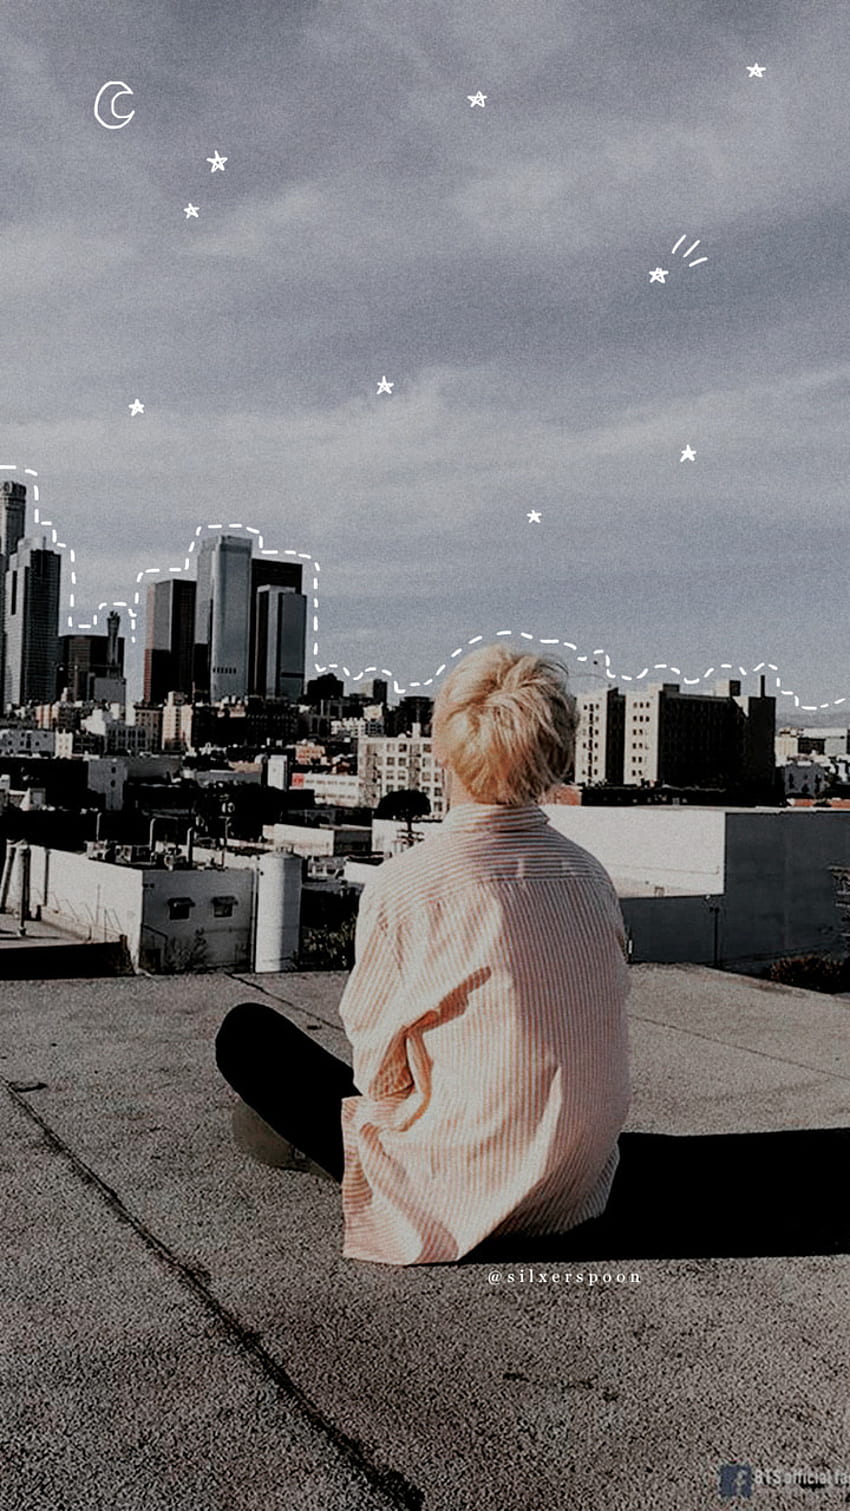 Wallpaper of a blonde guy sitting on a rooftop - Jimin